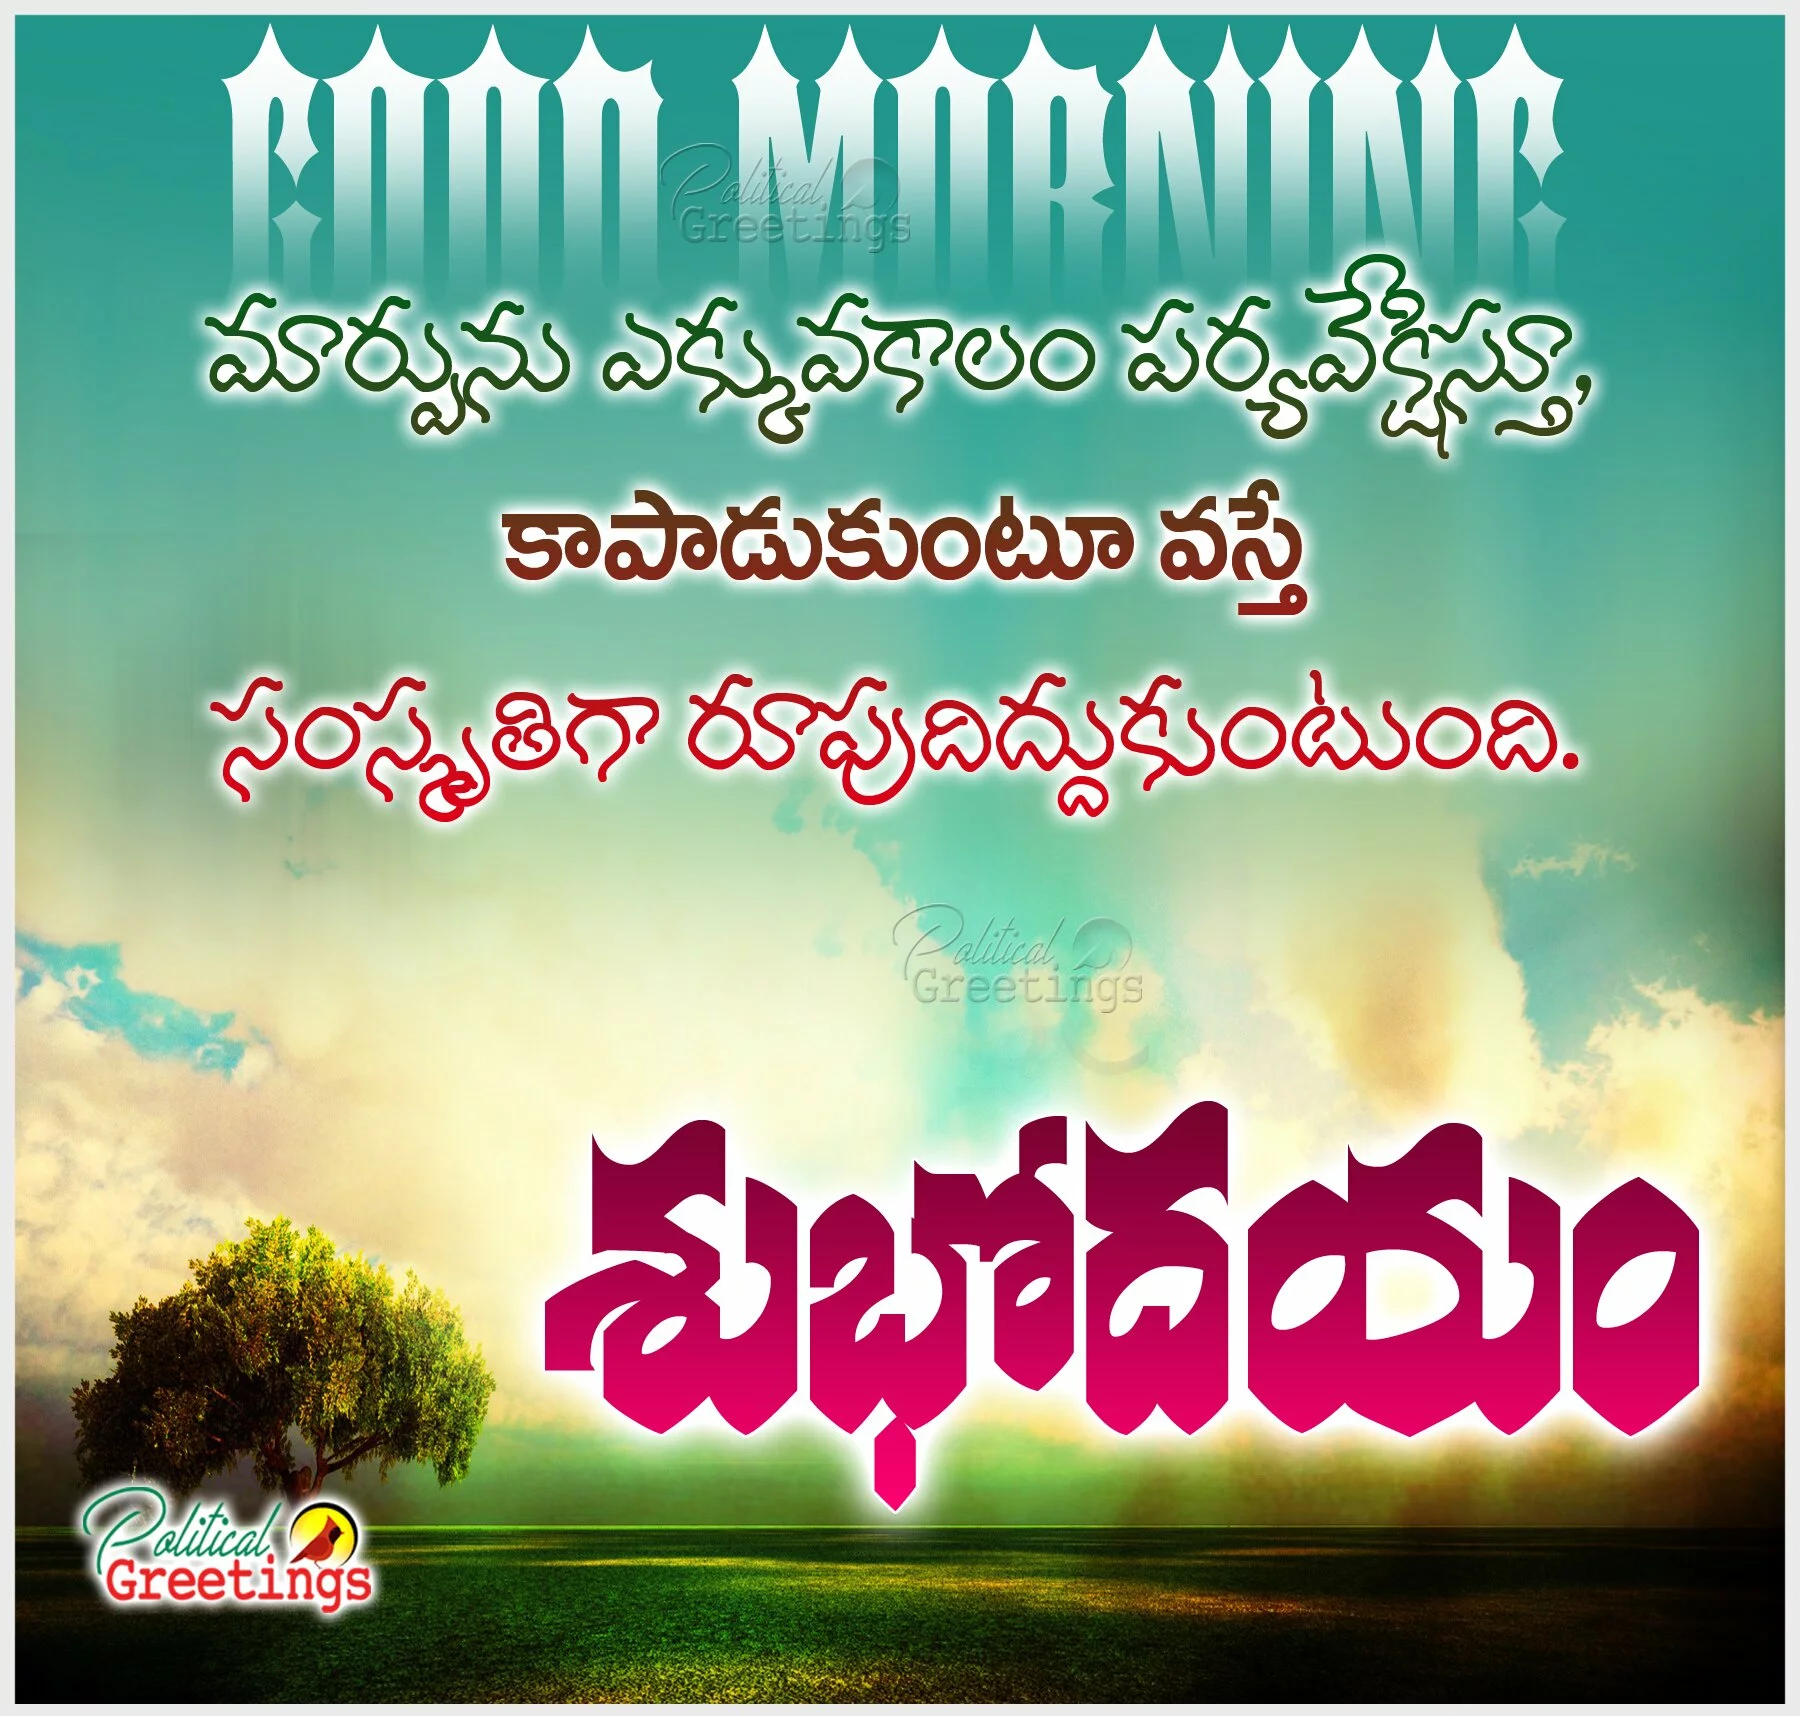 Best Telugu Good Morning Quotes and Sayings Pictures Top Telugu Quotes Images